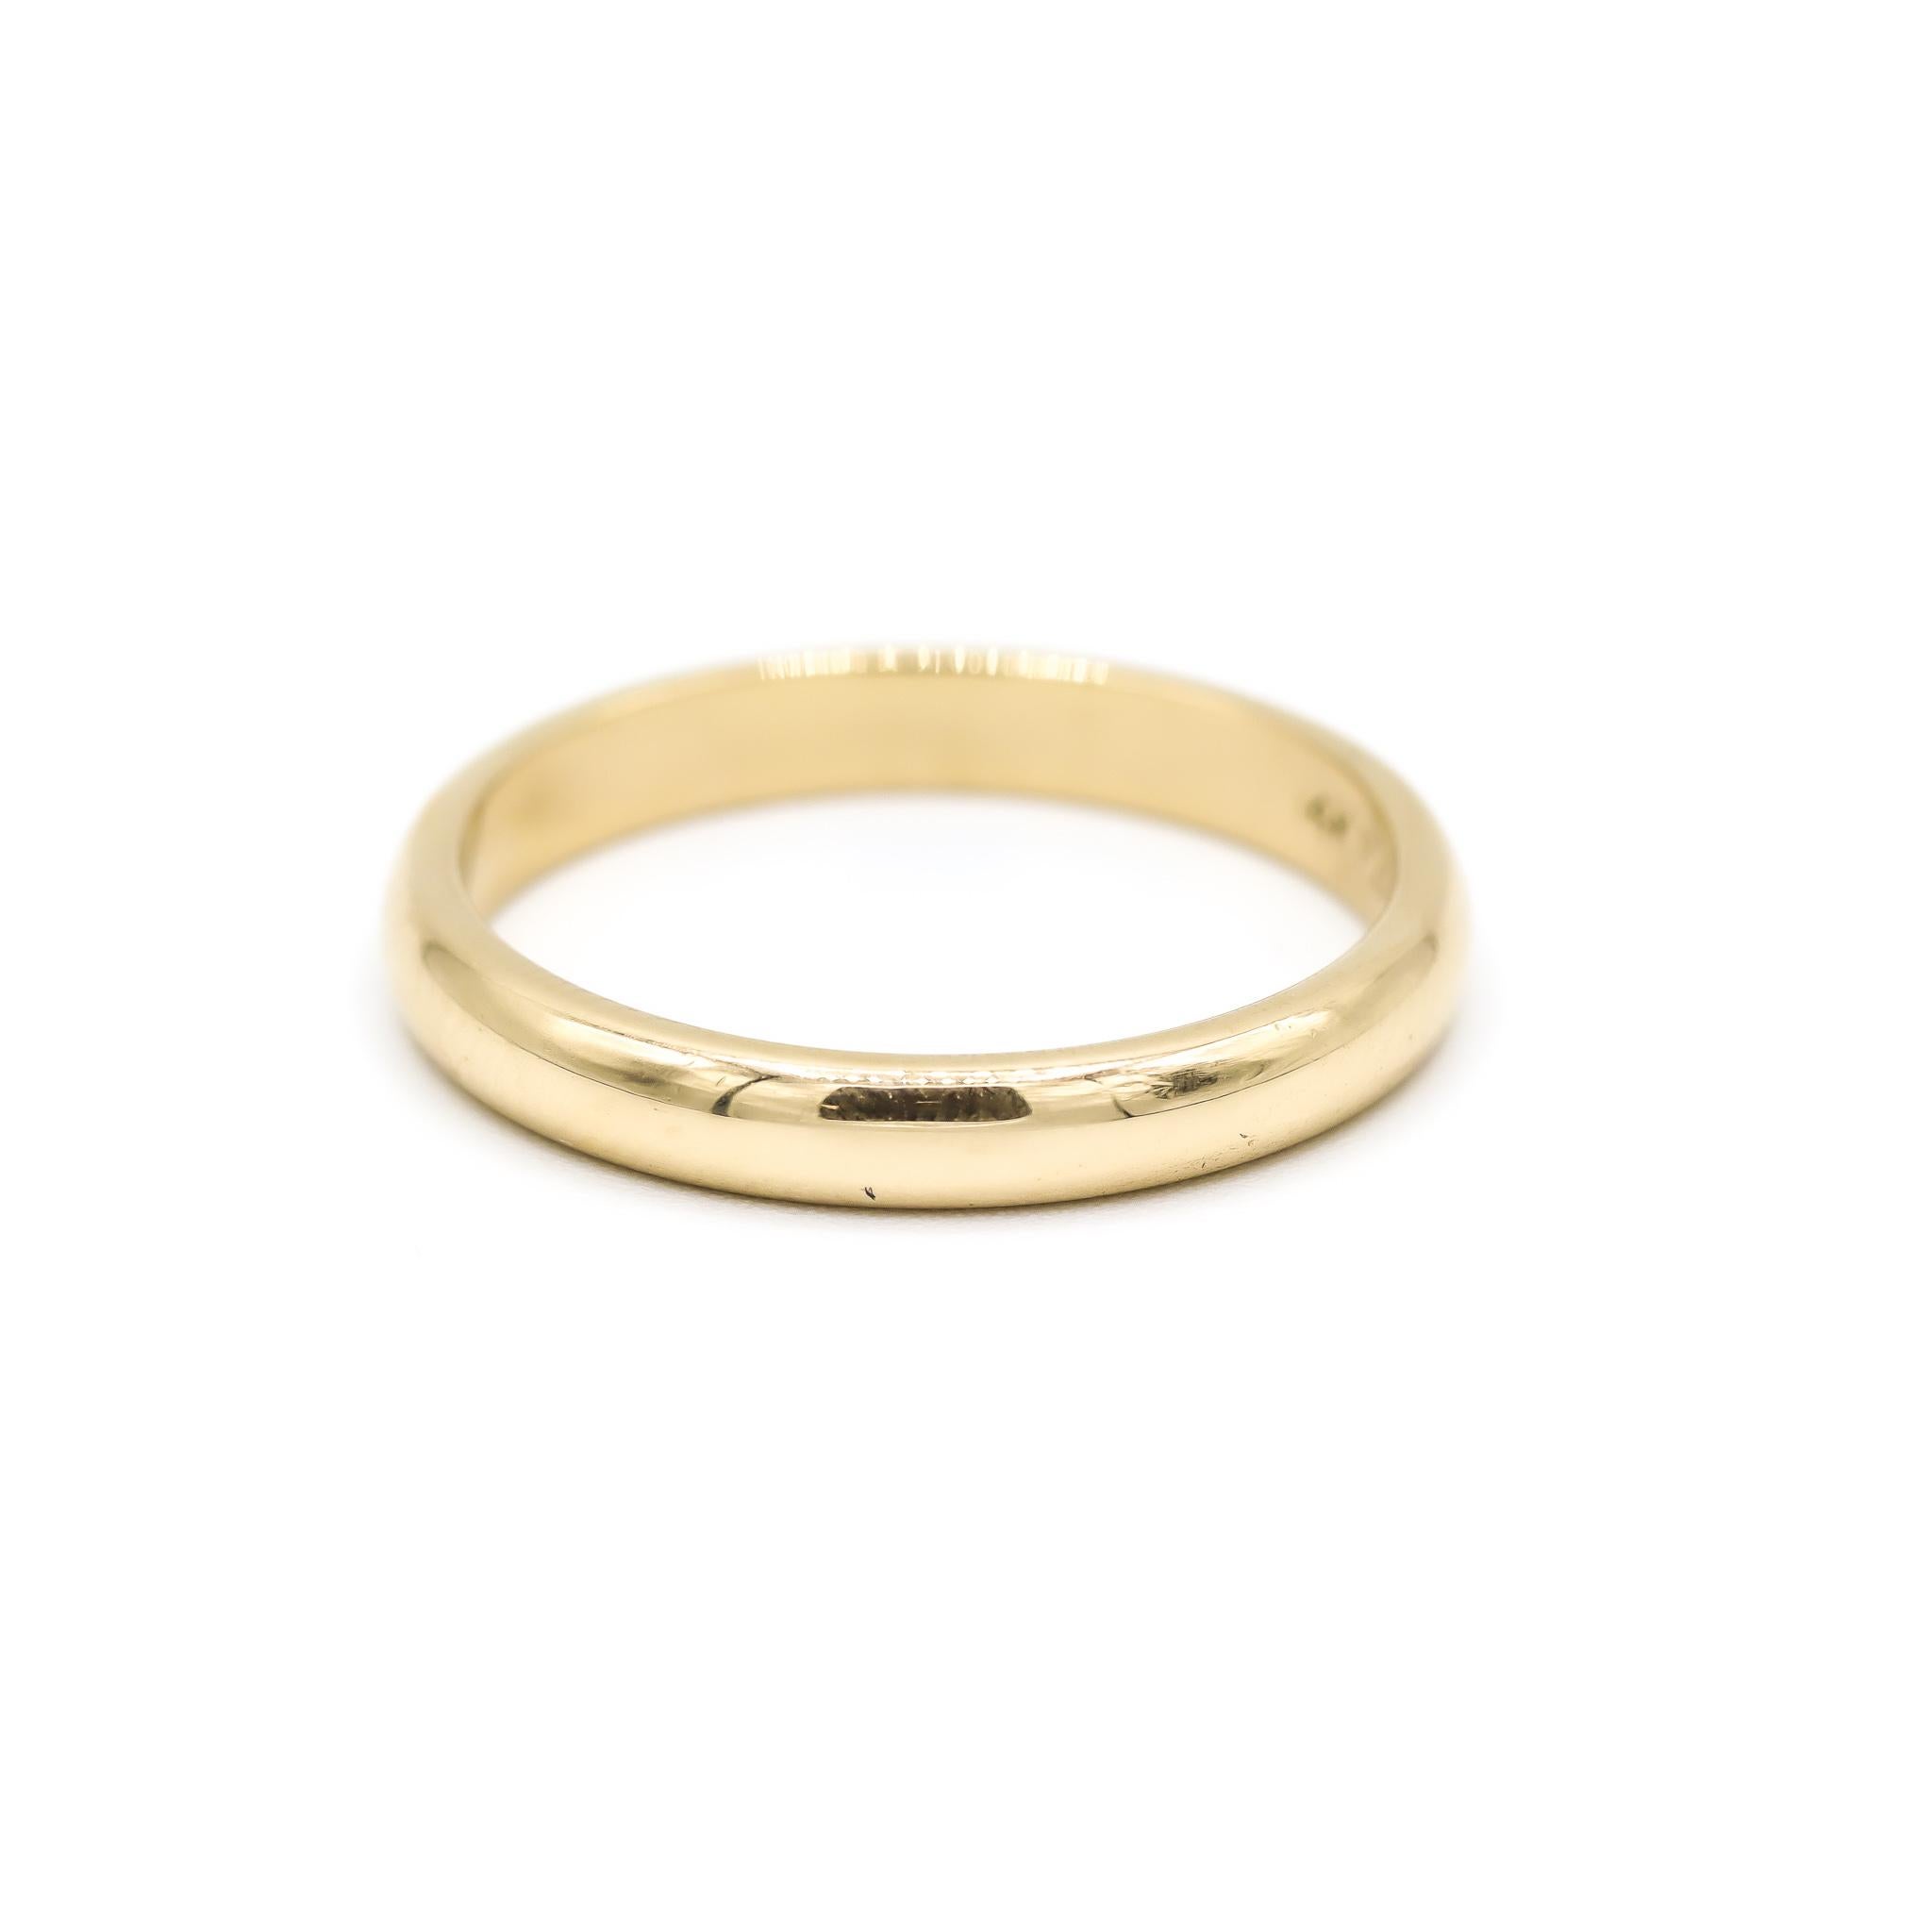 One lady's custom made polished 14K yellow gold, wedding band with a half-round shank. The band is a size 7.5. The band weighs a total of 3.10 grams. Engraved with 